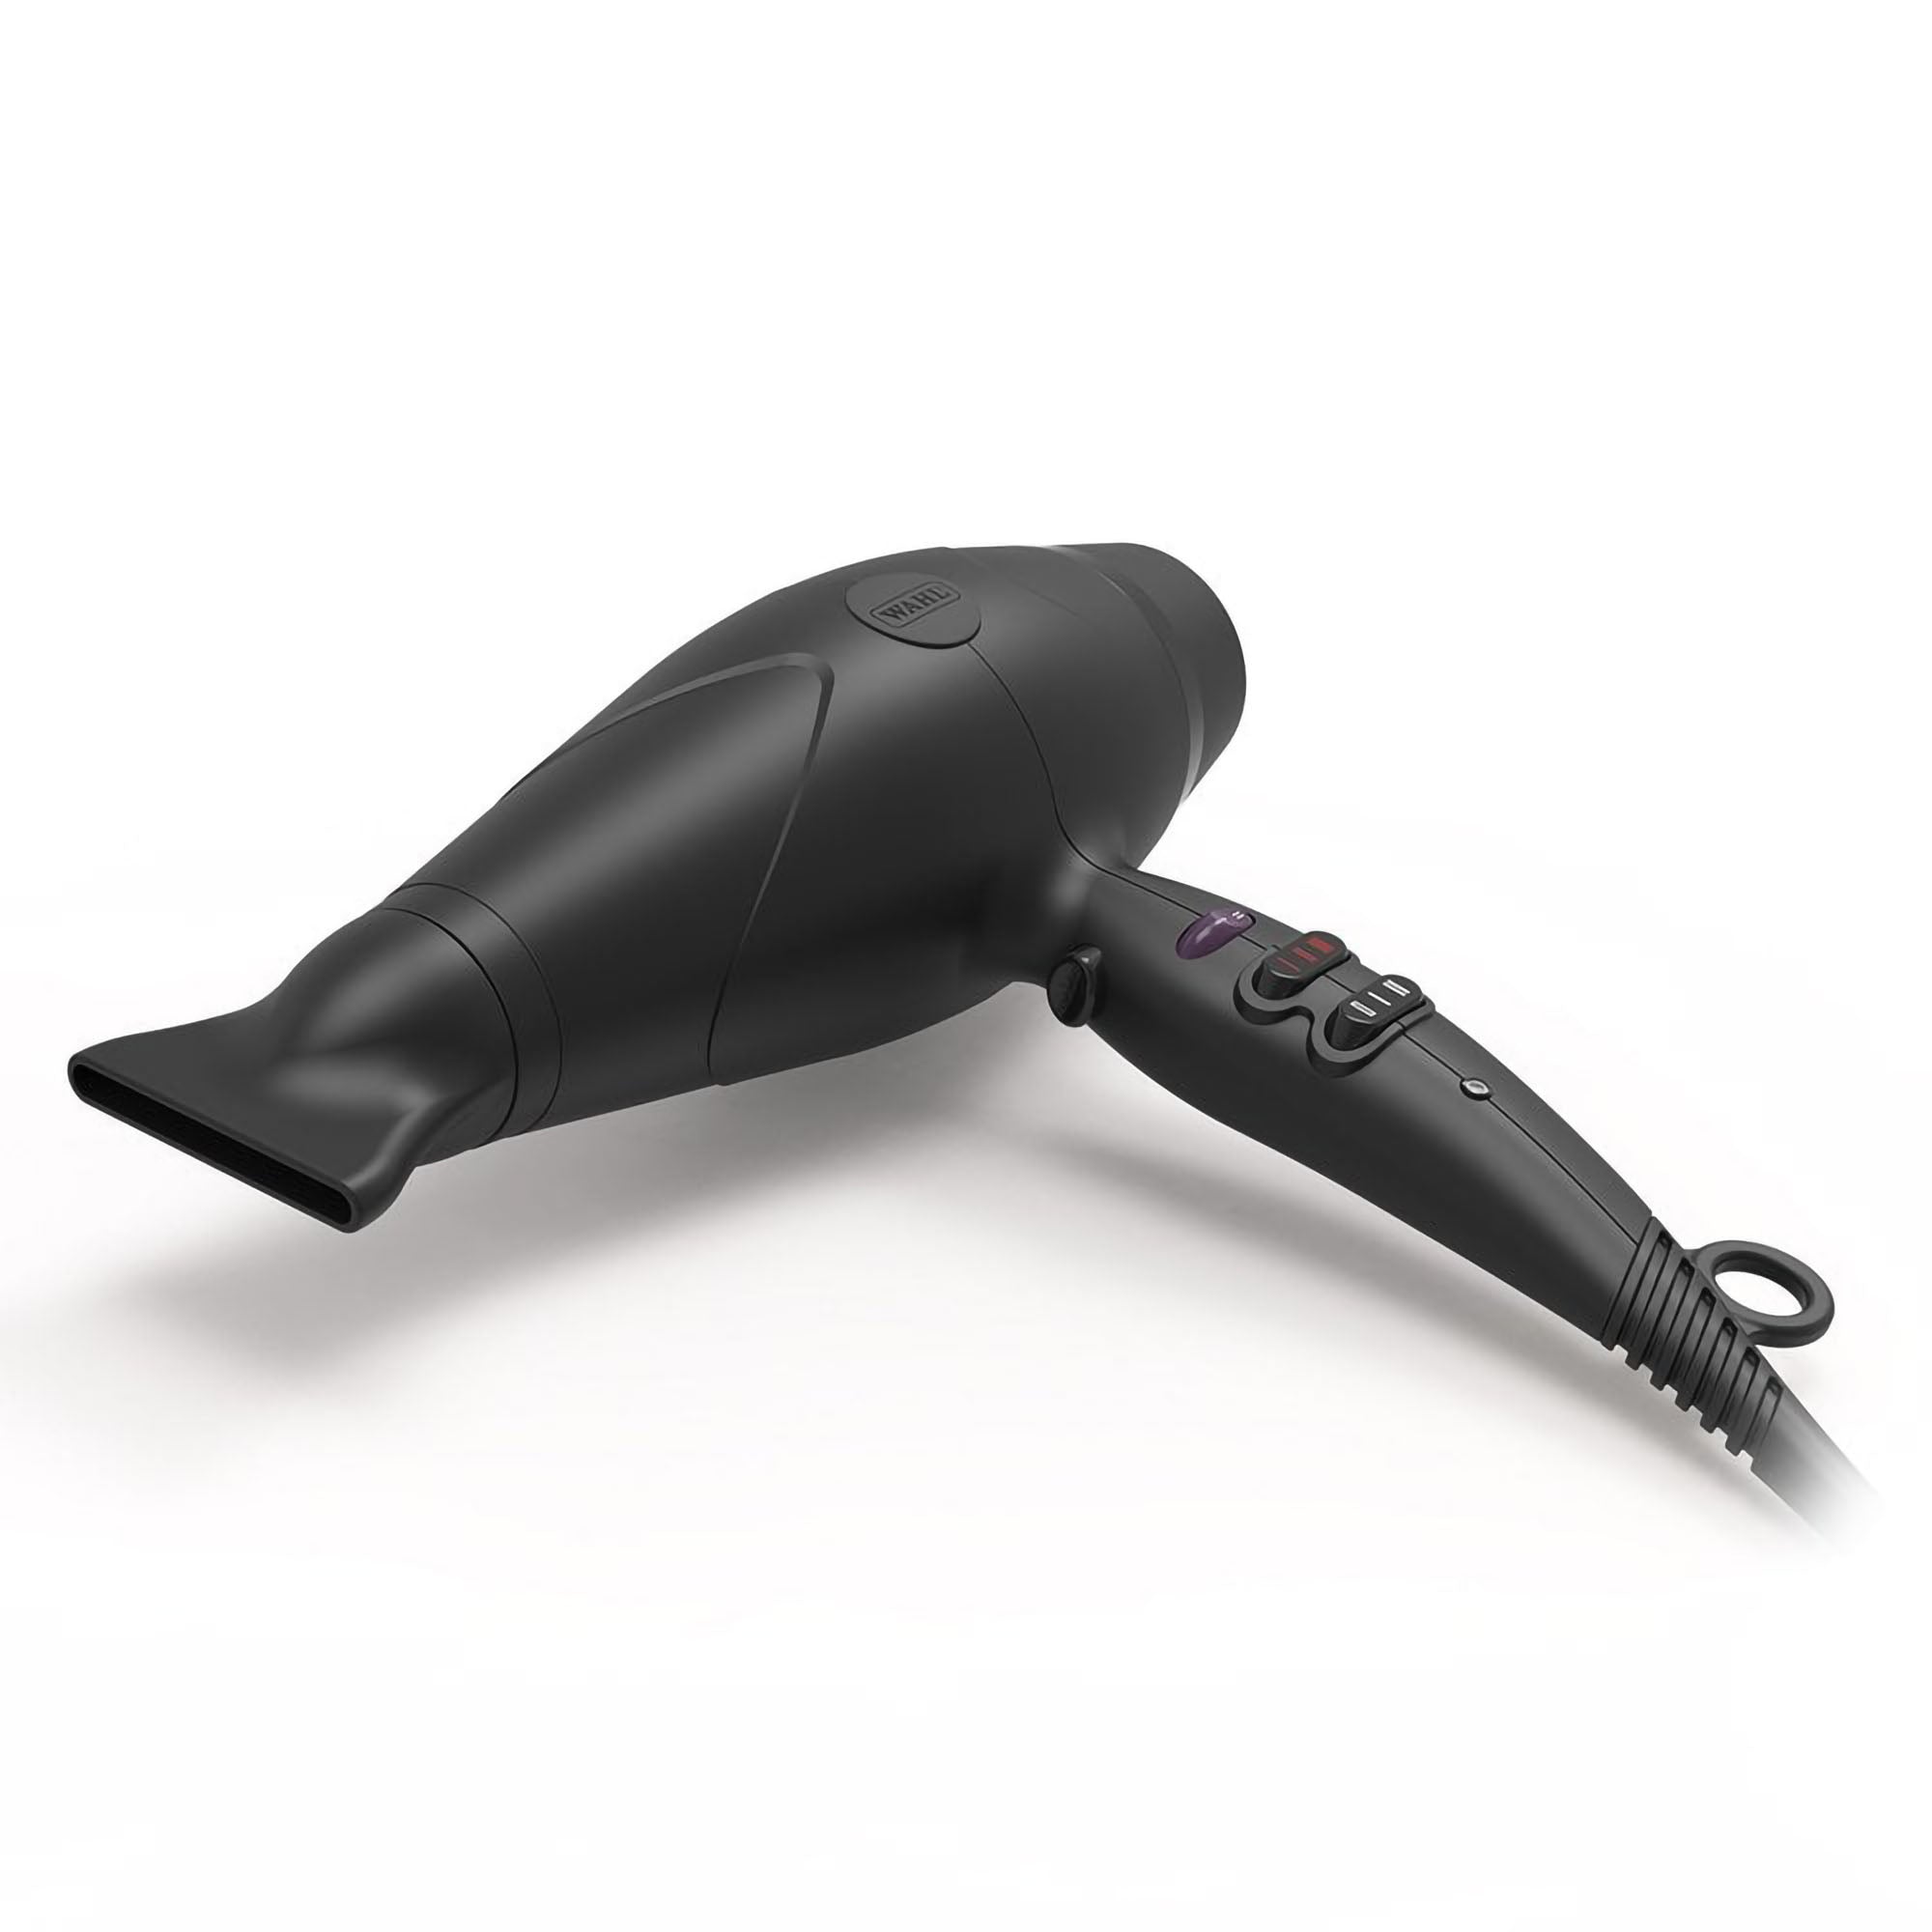 Wahl - The Style Collection Dryer 2400W